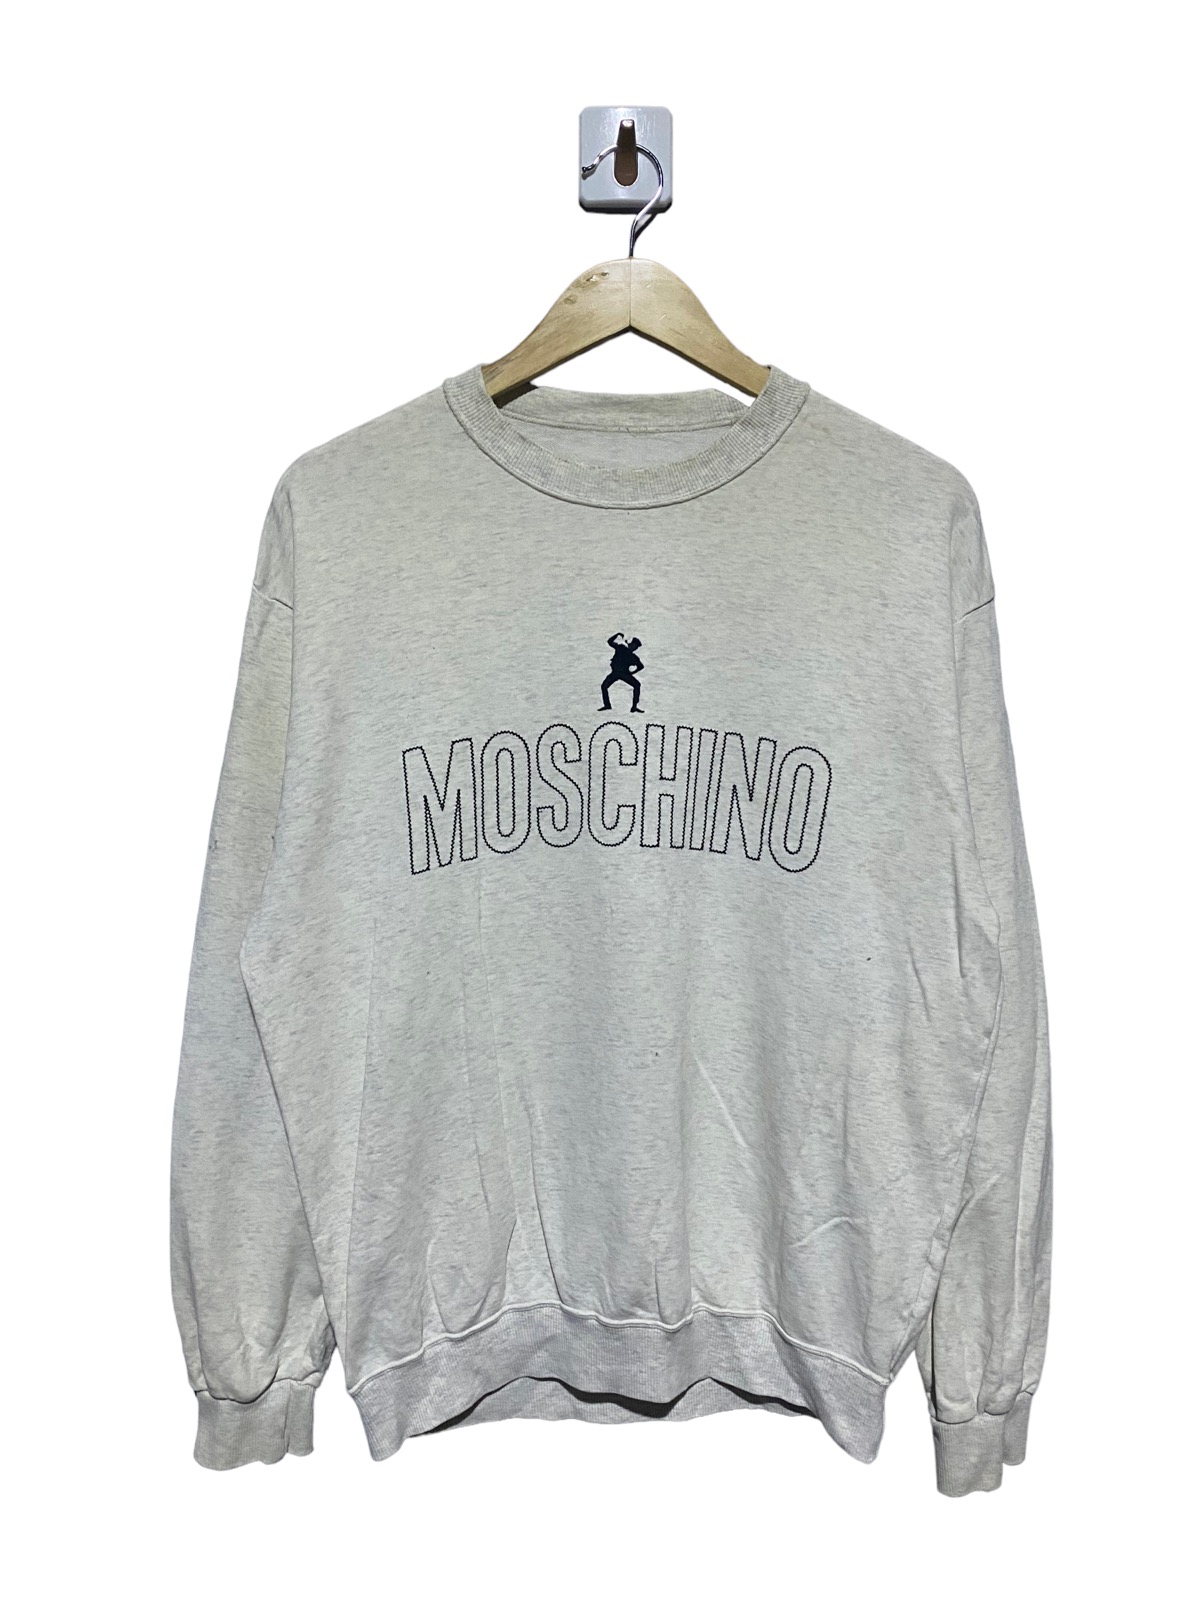 🔥SALE🔥MOSCHINO SWEATSHIRTS EMBROIDERED LOGOS MADE IN JAPAN - 1